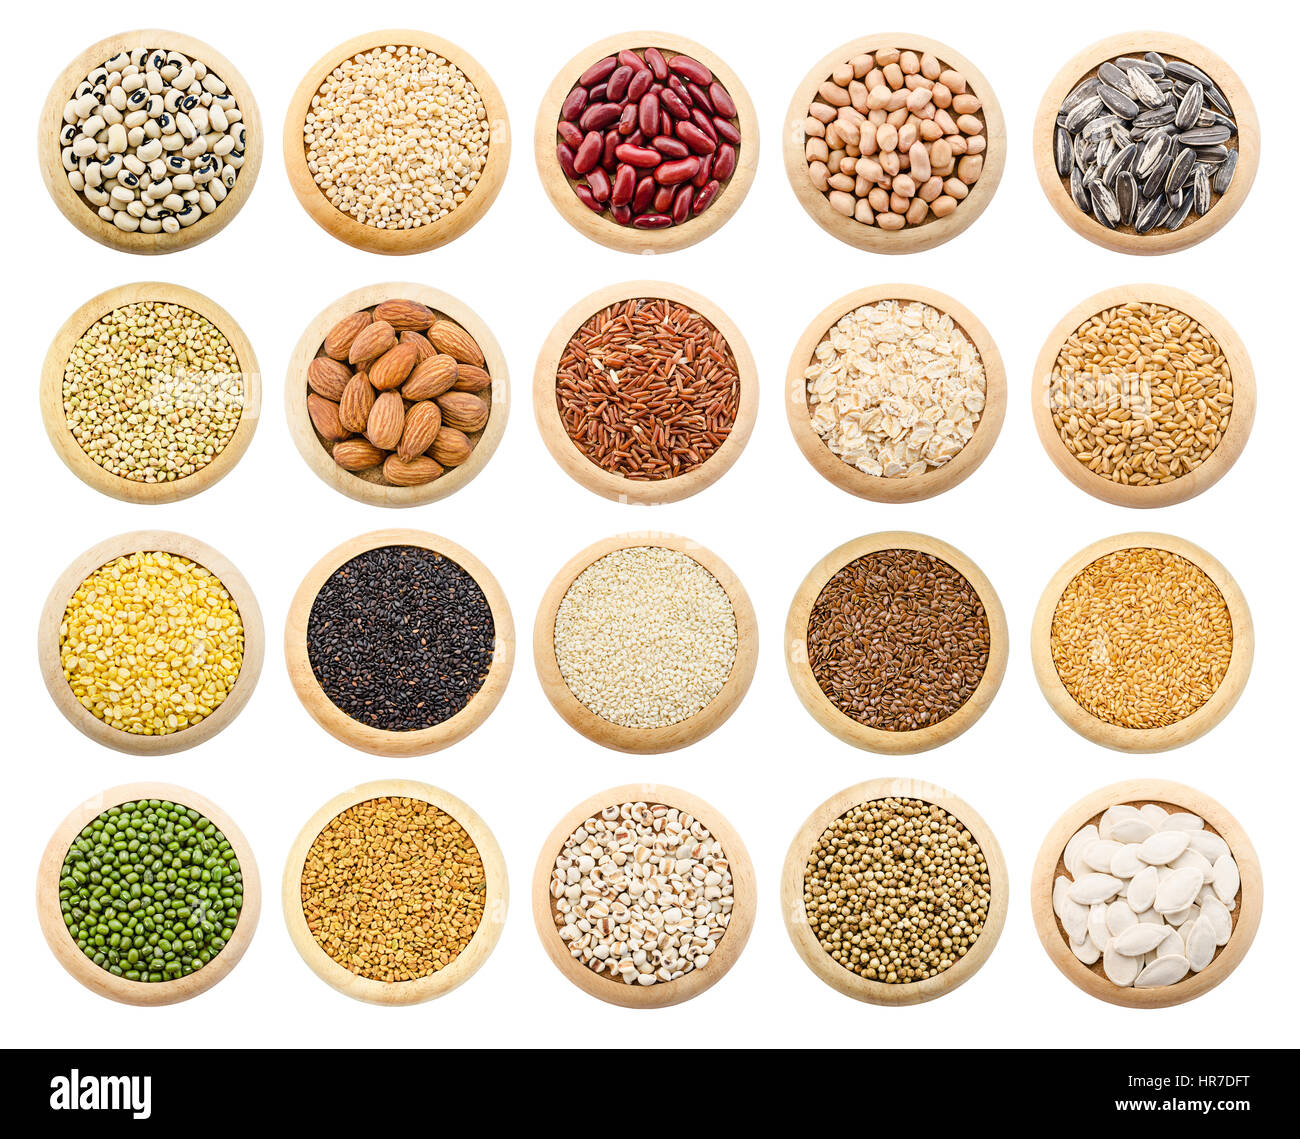 Dried grains, peas and rice collection isolated over white background. Stock Photo